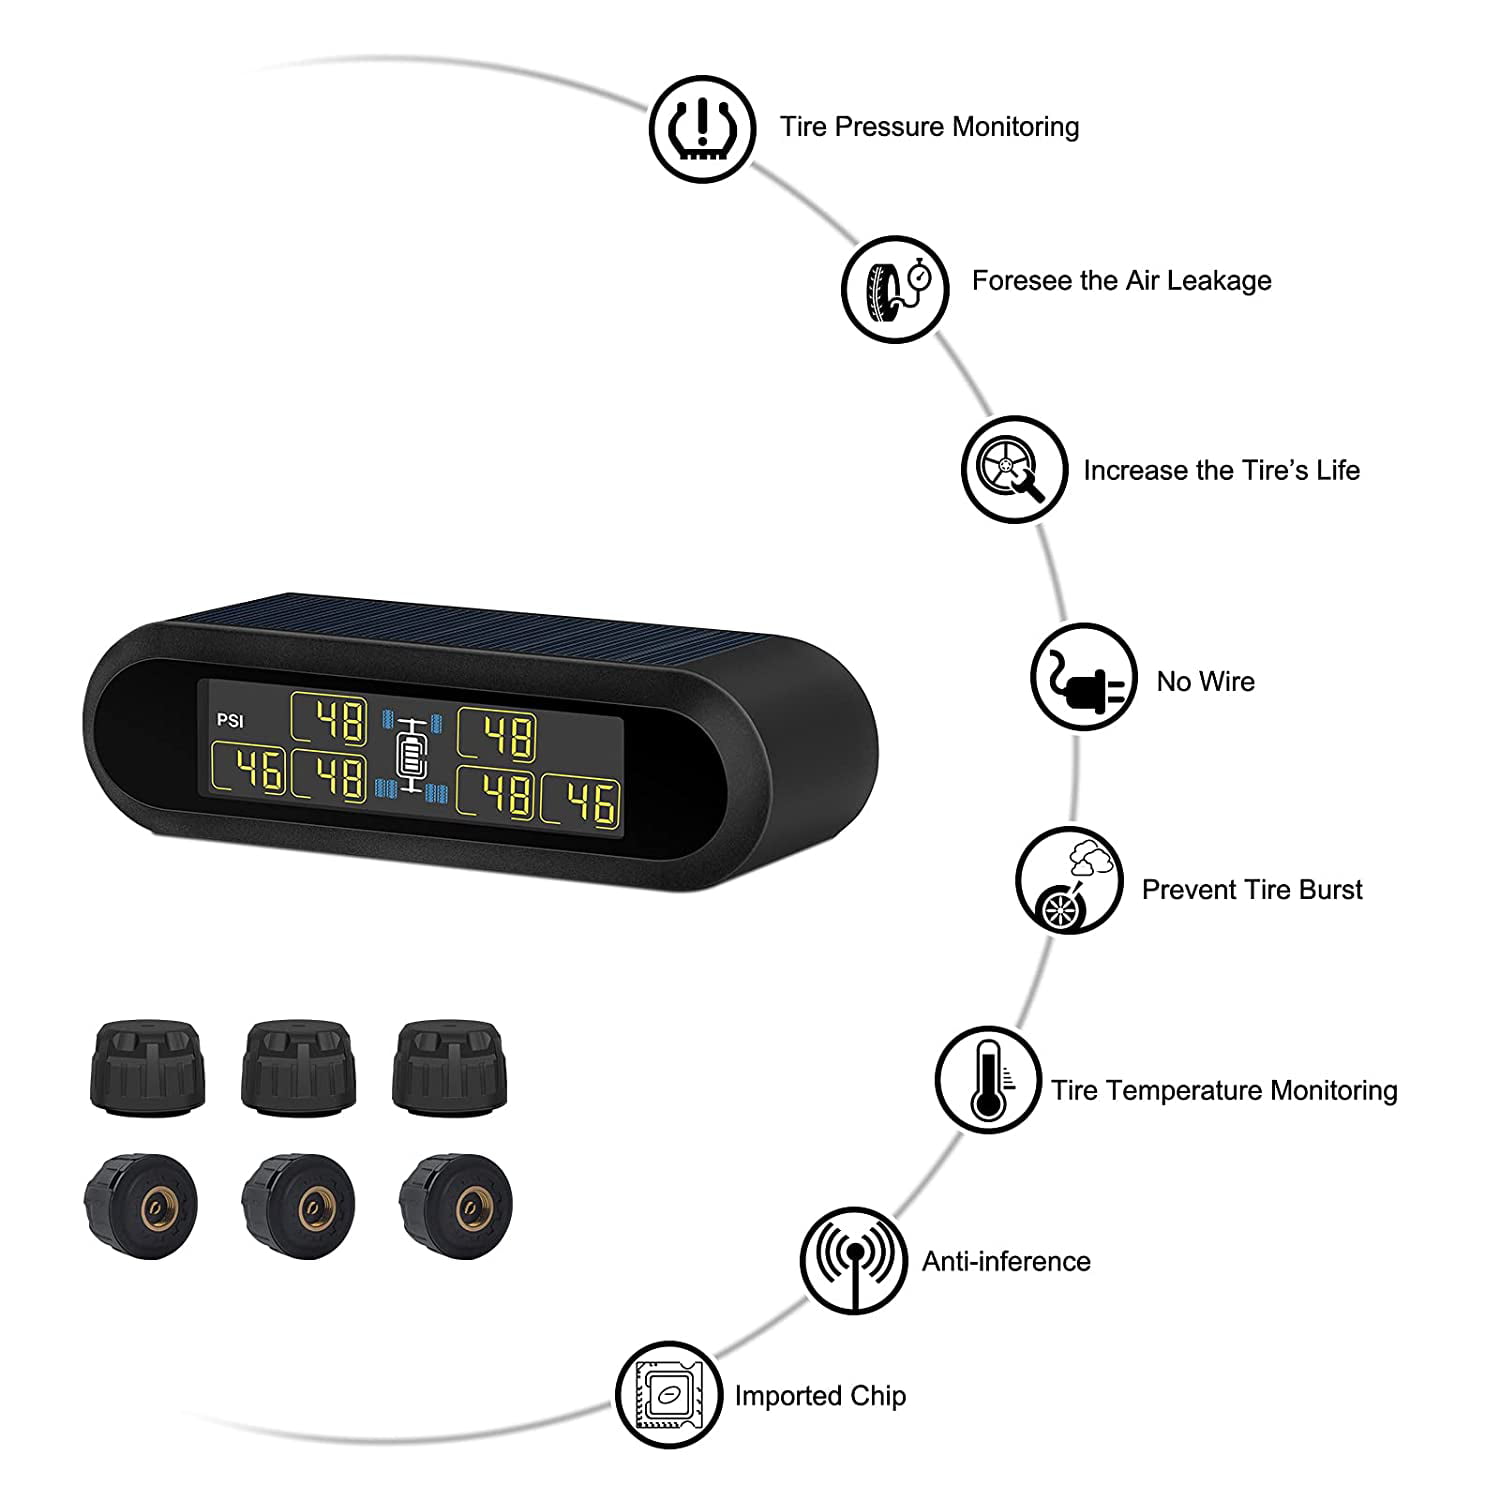 B-Qtech Newest Wireless TPMS Solar Power Tire Pressure Monitoring System RV Truck TPMS with 6 Sensors and with Booster for Car RV Truck Tow Motorhome Travel Trailer’s Pressure and Temperature 